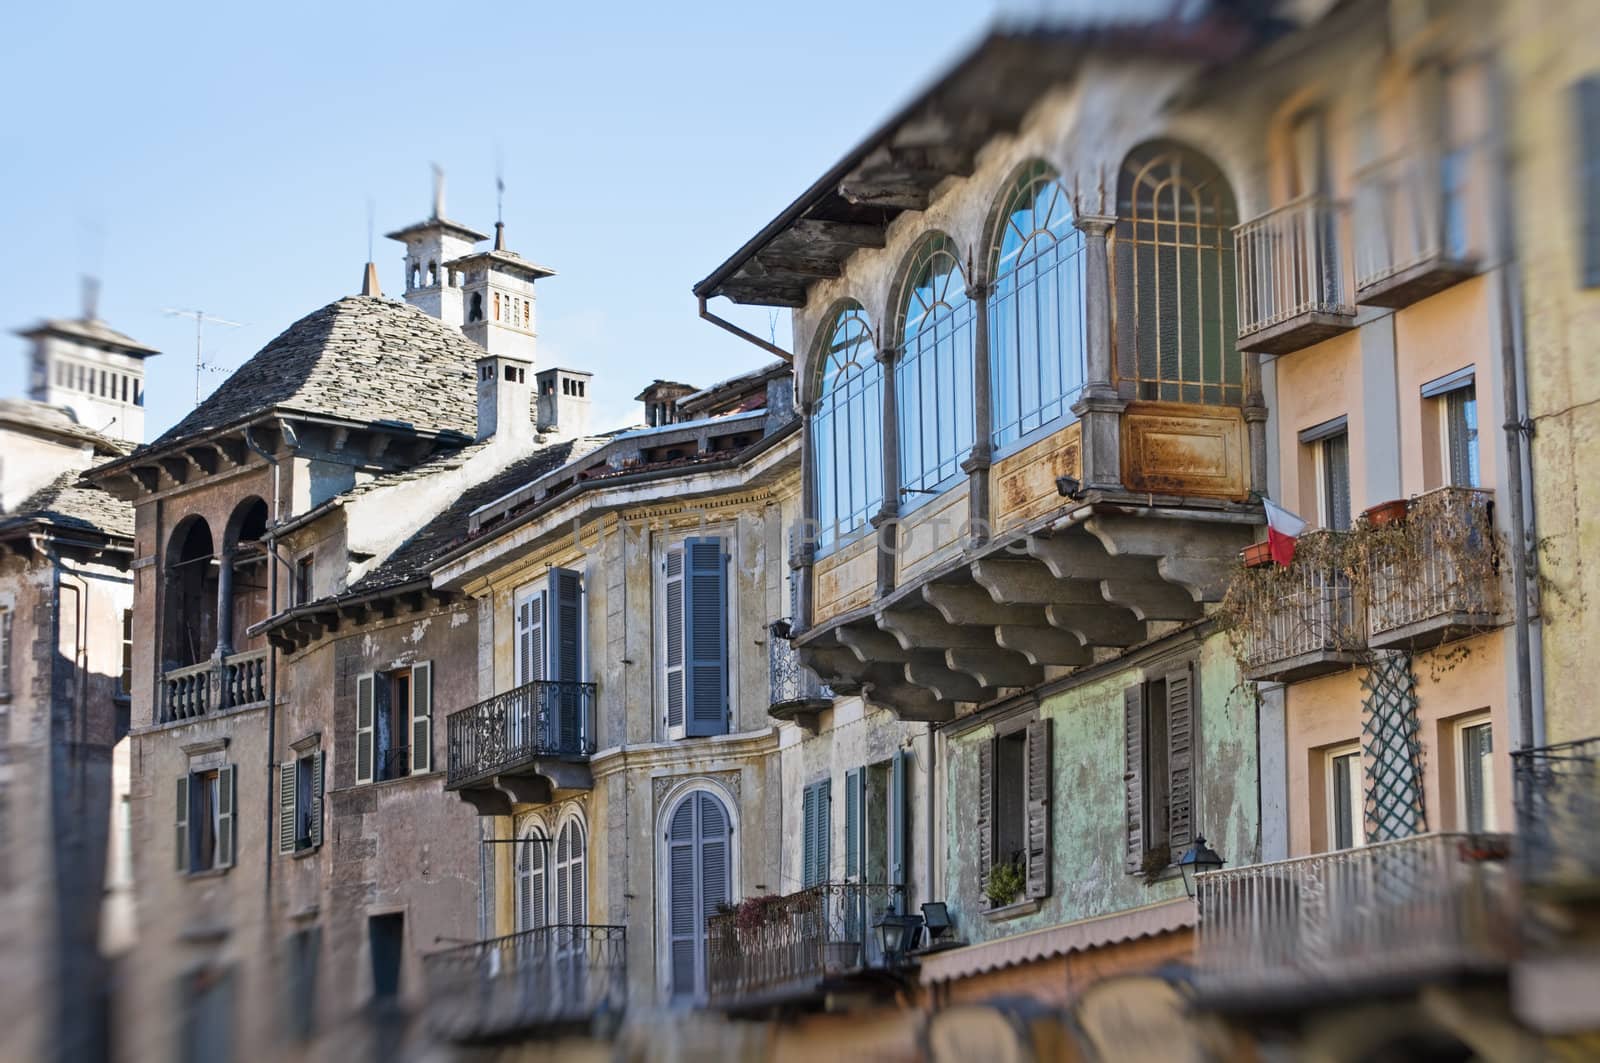 Domodossola, Italy - Medieval houses by sil